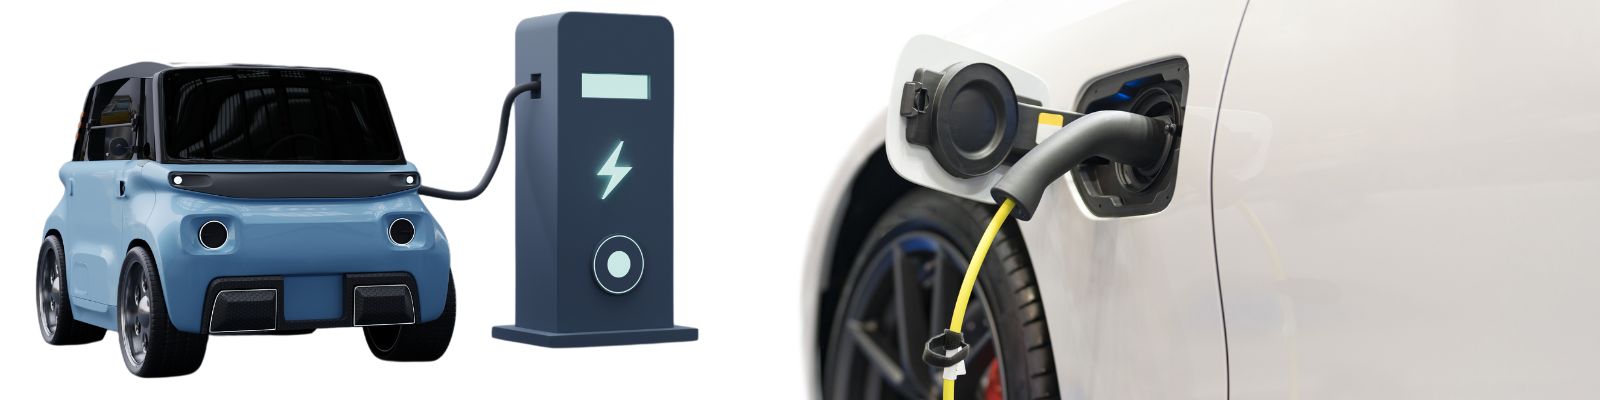 Electric Vehicles and Charging Points 